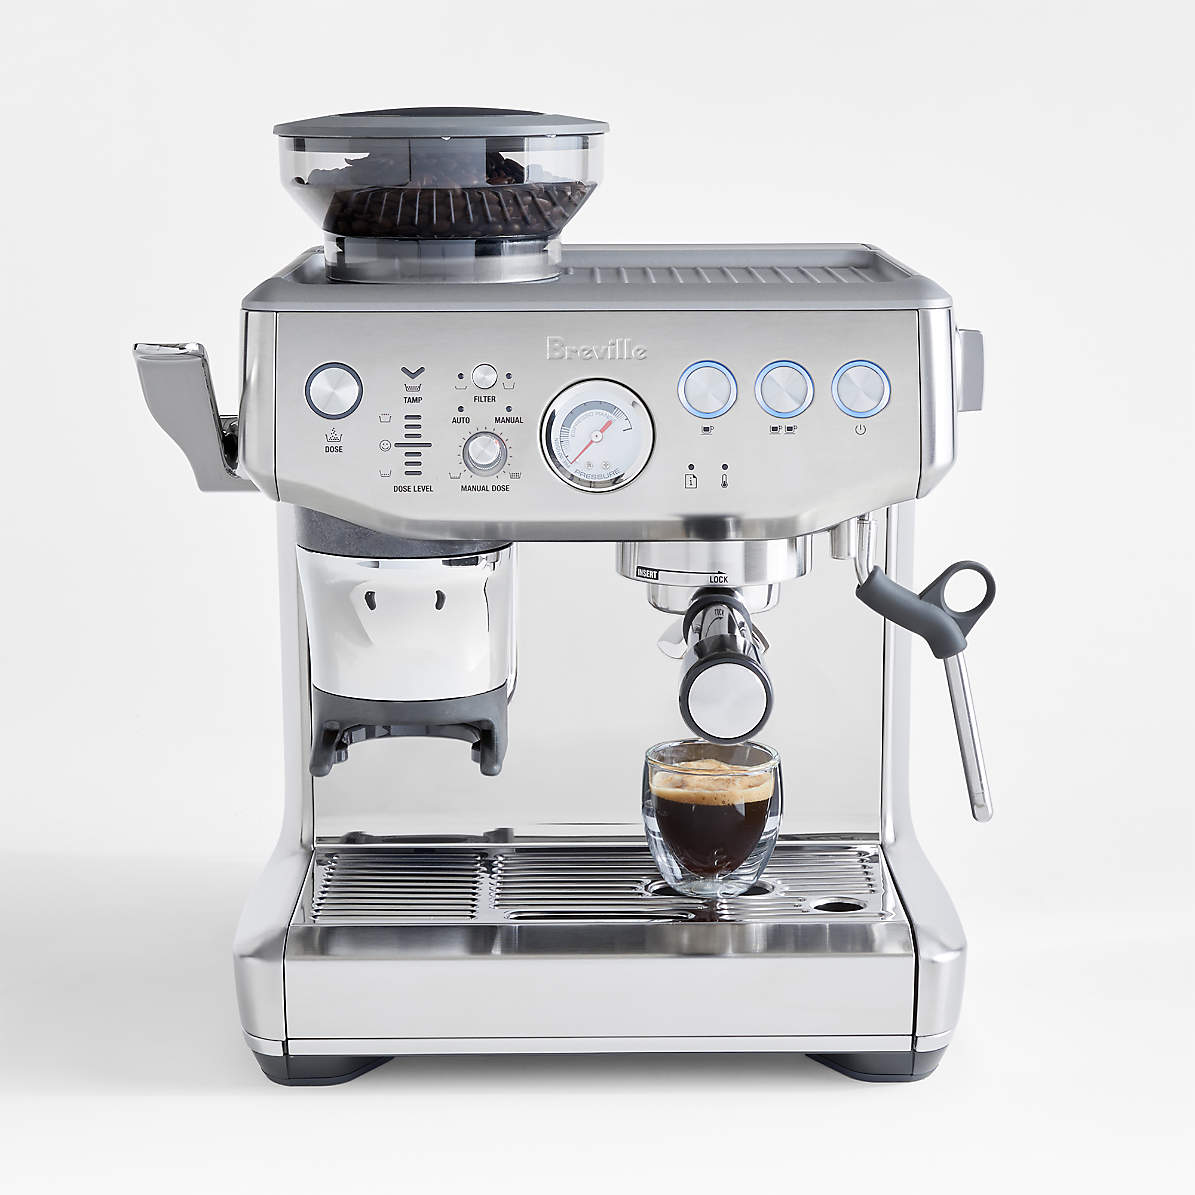 Intacto repentinamente organizar Breville Barista Express Impress Brushed Stainless Steel Espresso Machine +  Reviews | Crate & Barrel